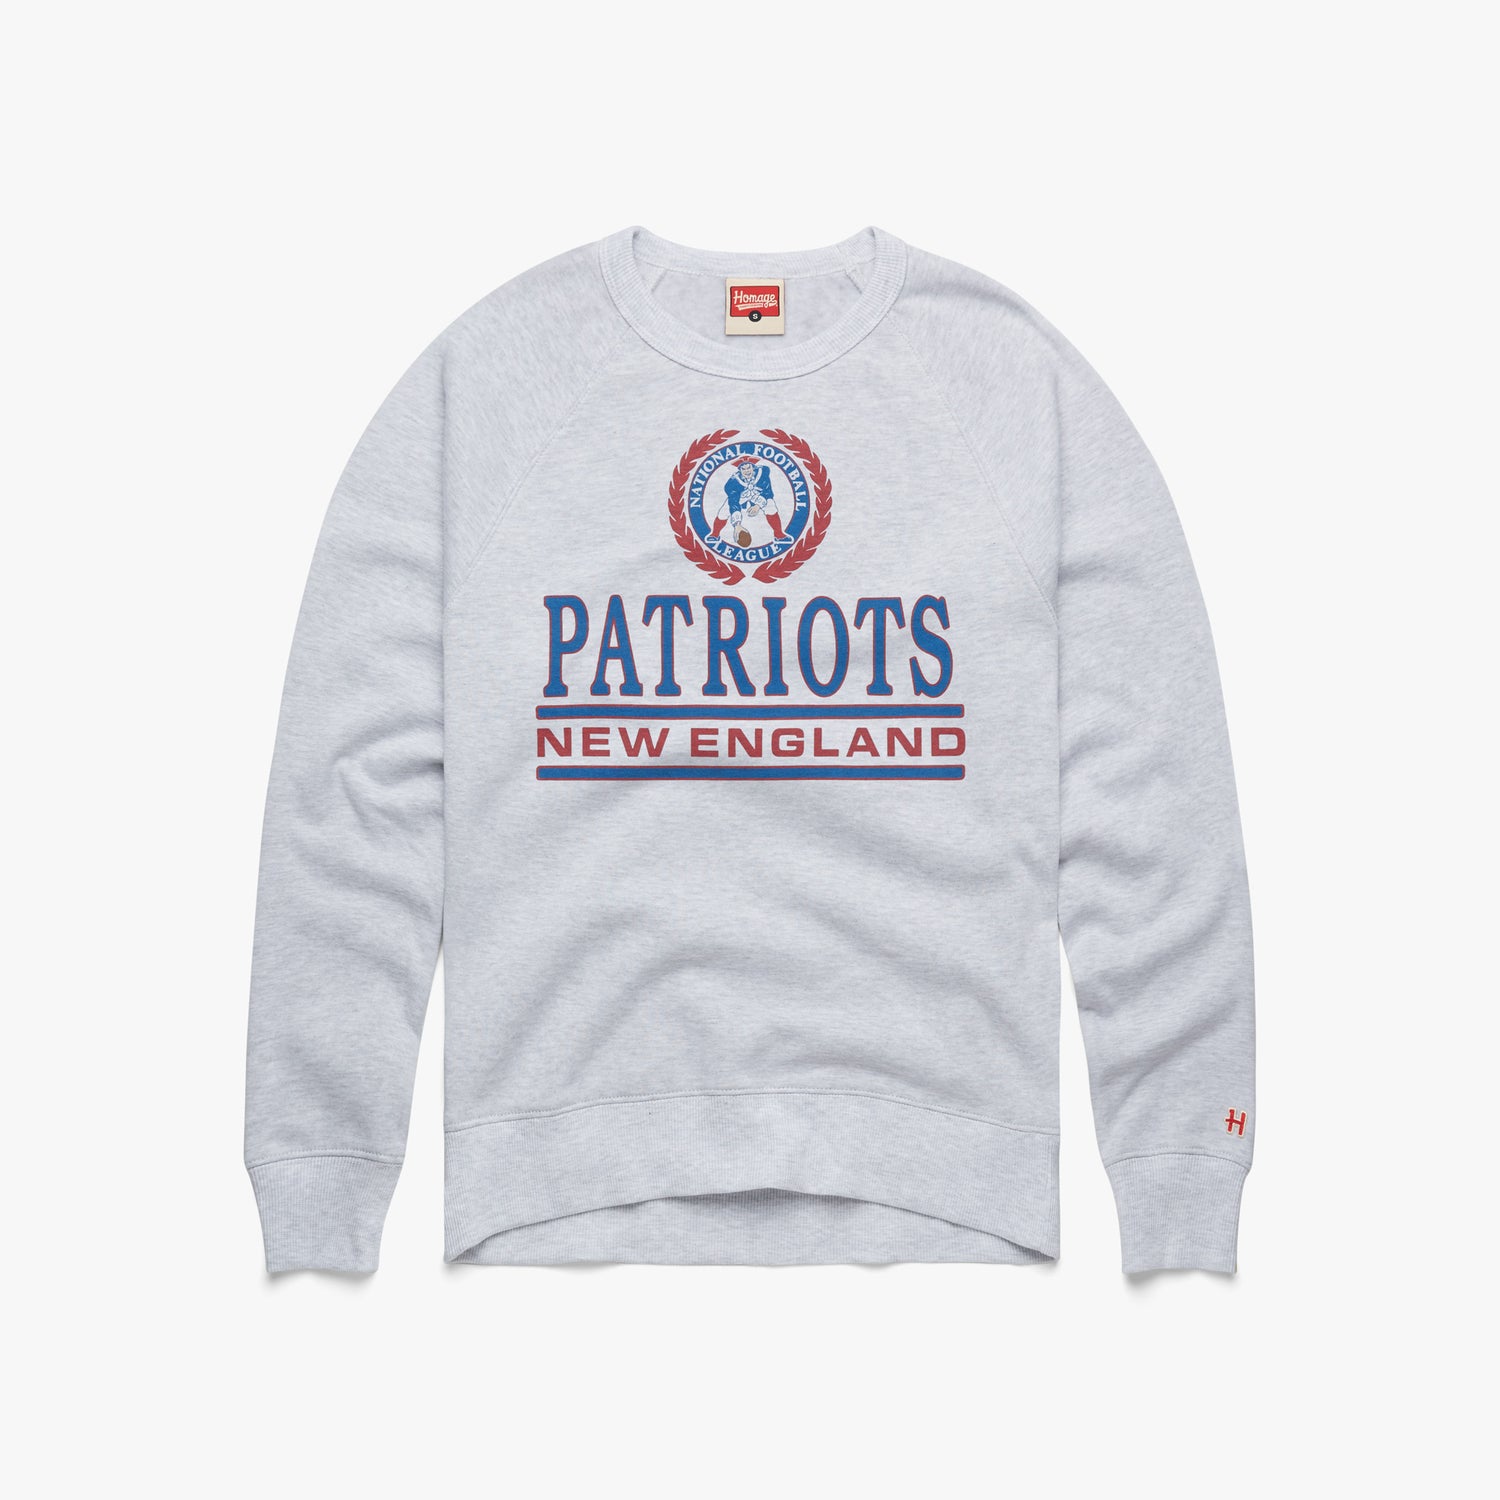 New England Patriots Crest Crewneck from Homage. | Officially Licensed Vintage NFL Apparel from Homage Pro Shop.